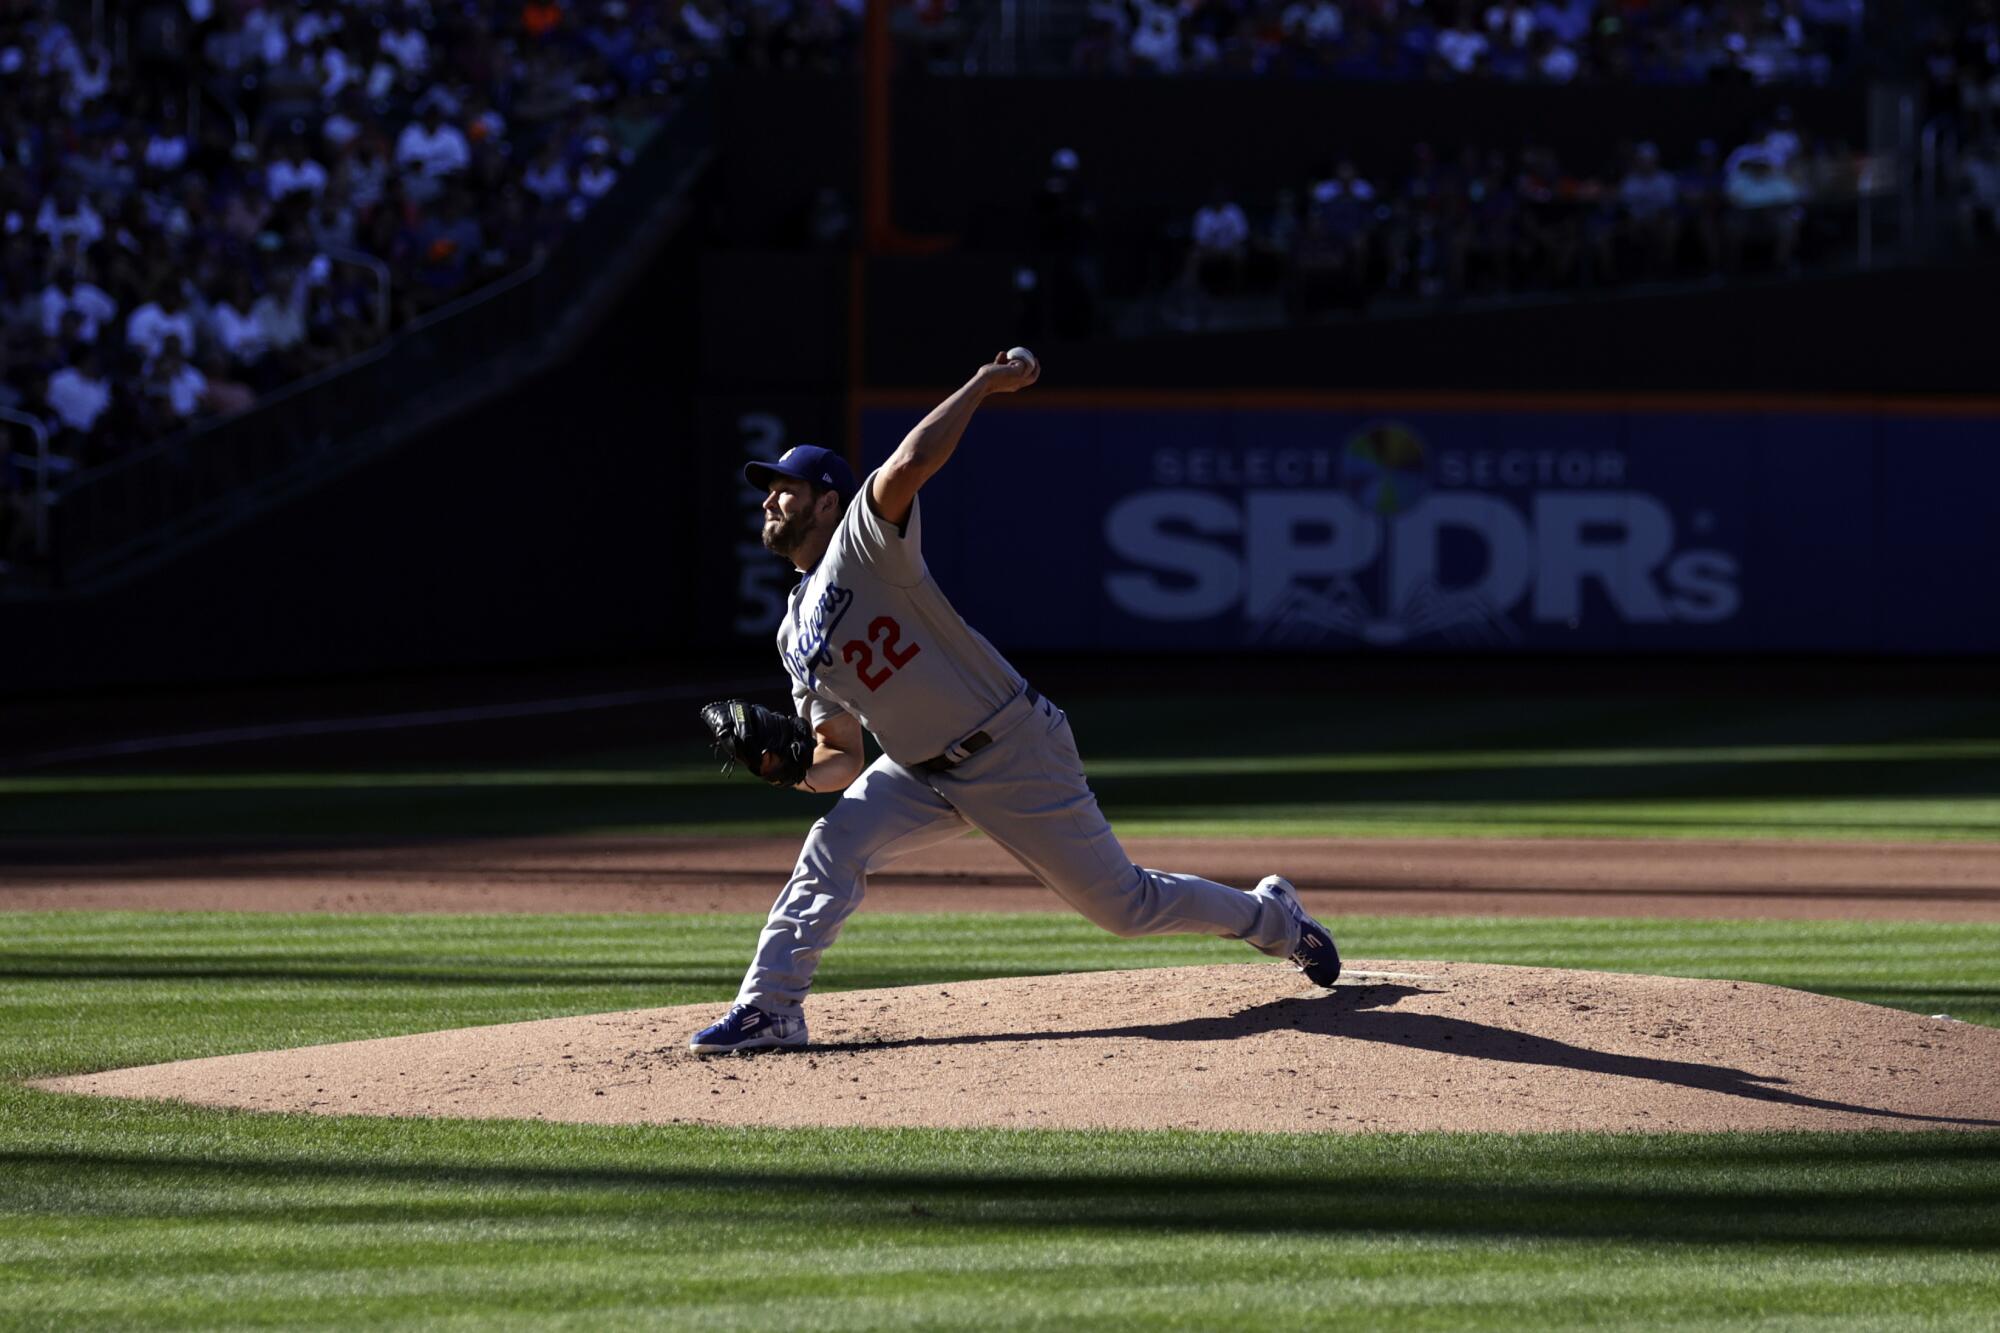 Los Angeles Dodgers pitcher Clayton Kershaw throws during the first inning of a baseball game.